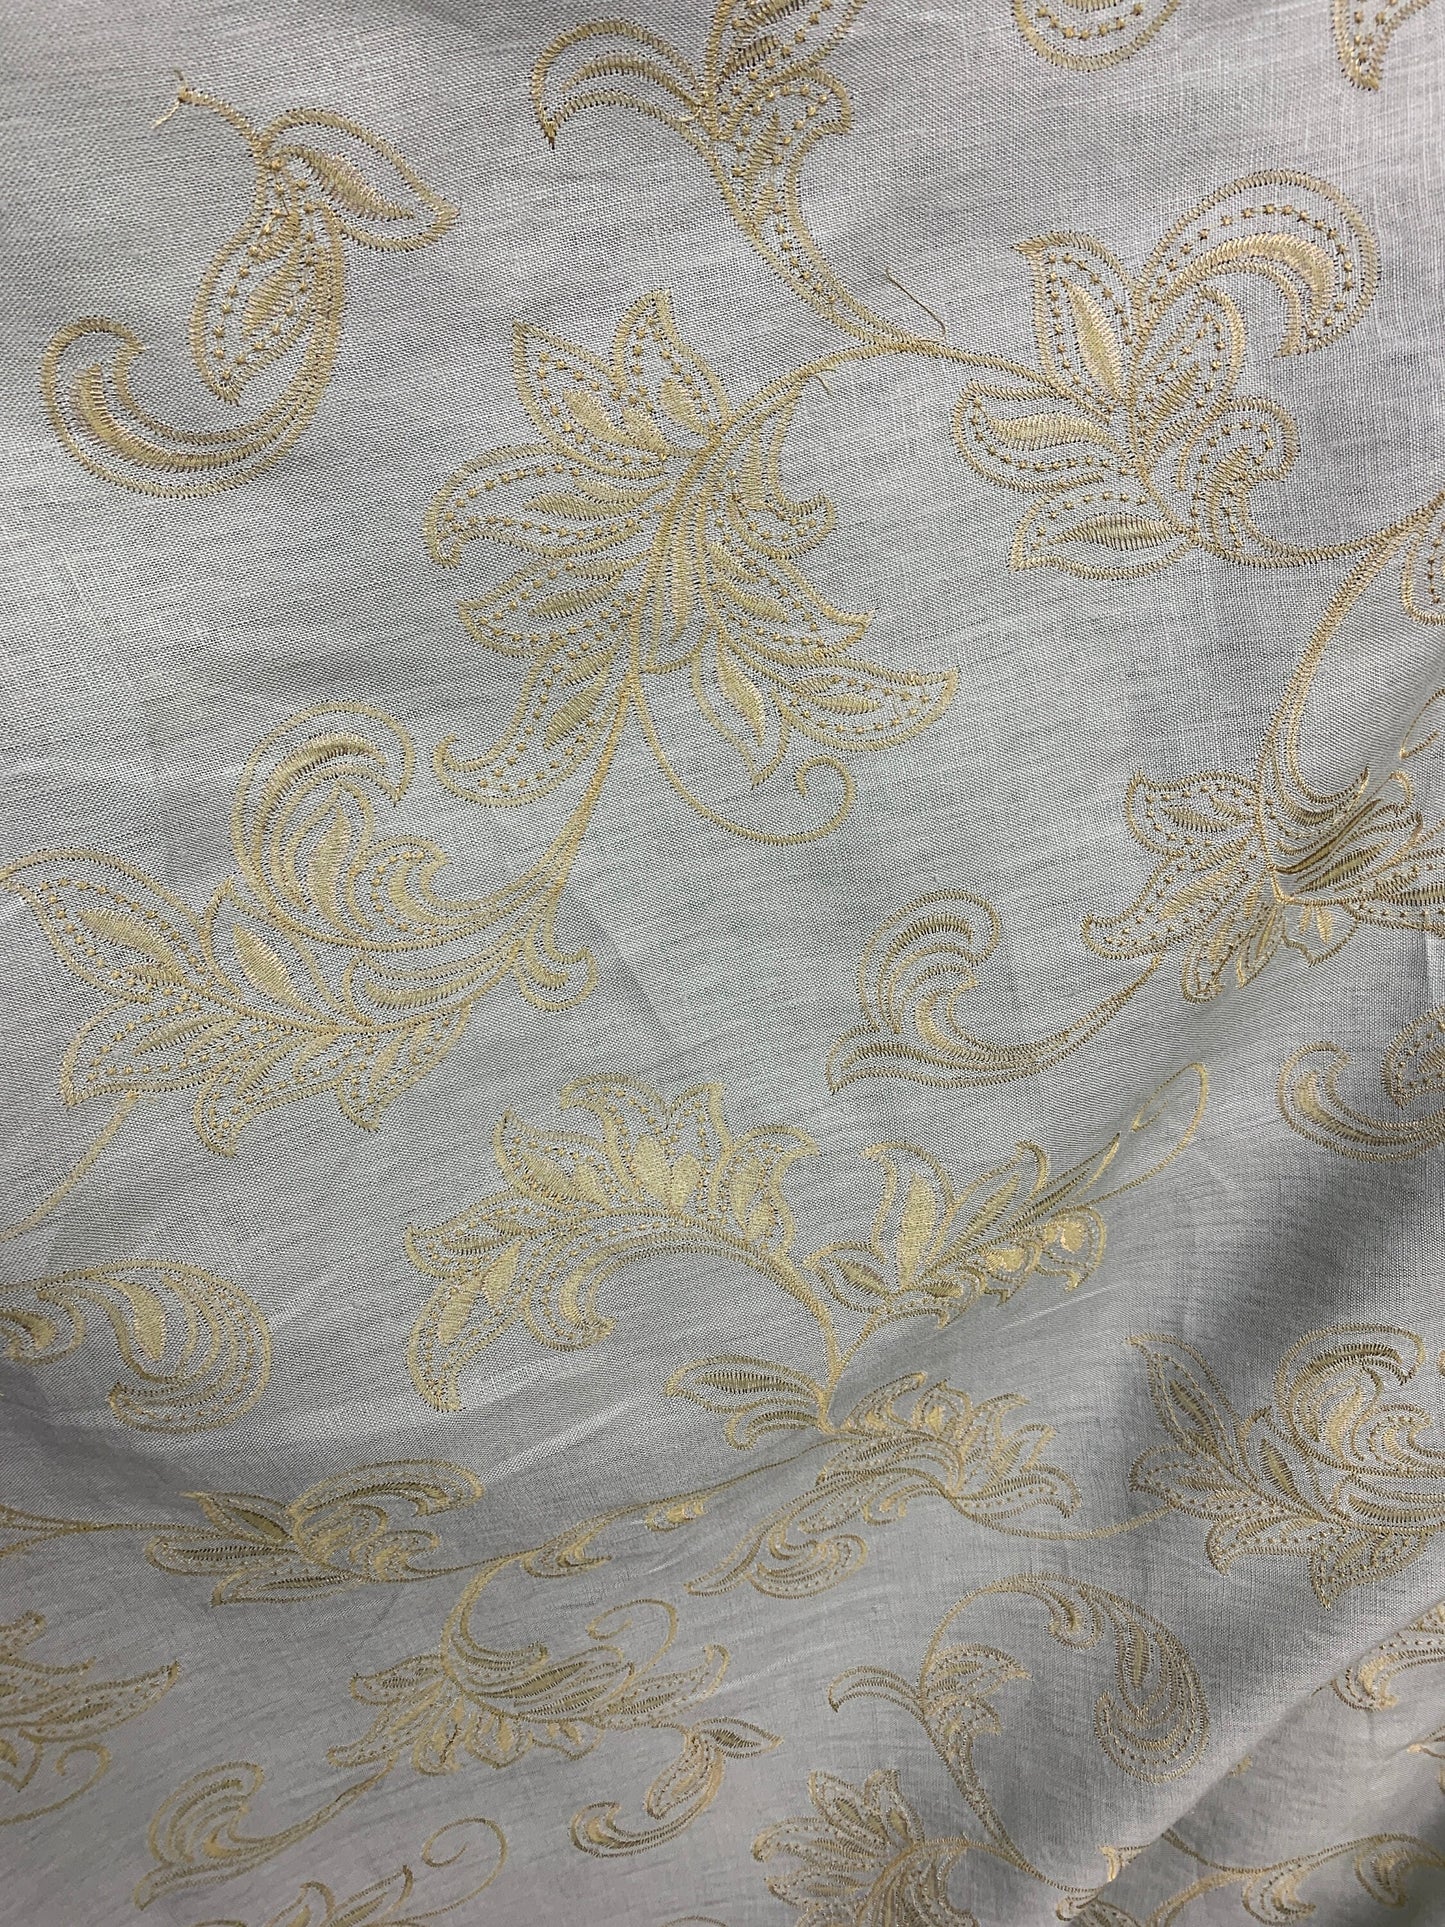 GRAY BEIGE Floral Embroidered 100% Linen Fabric (54 in.) Sold By The Yard